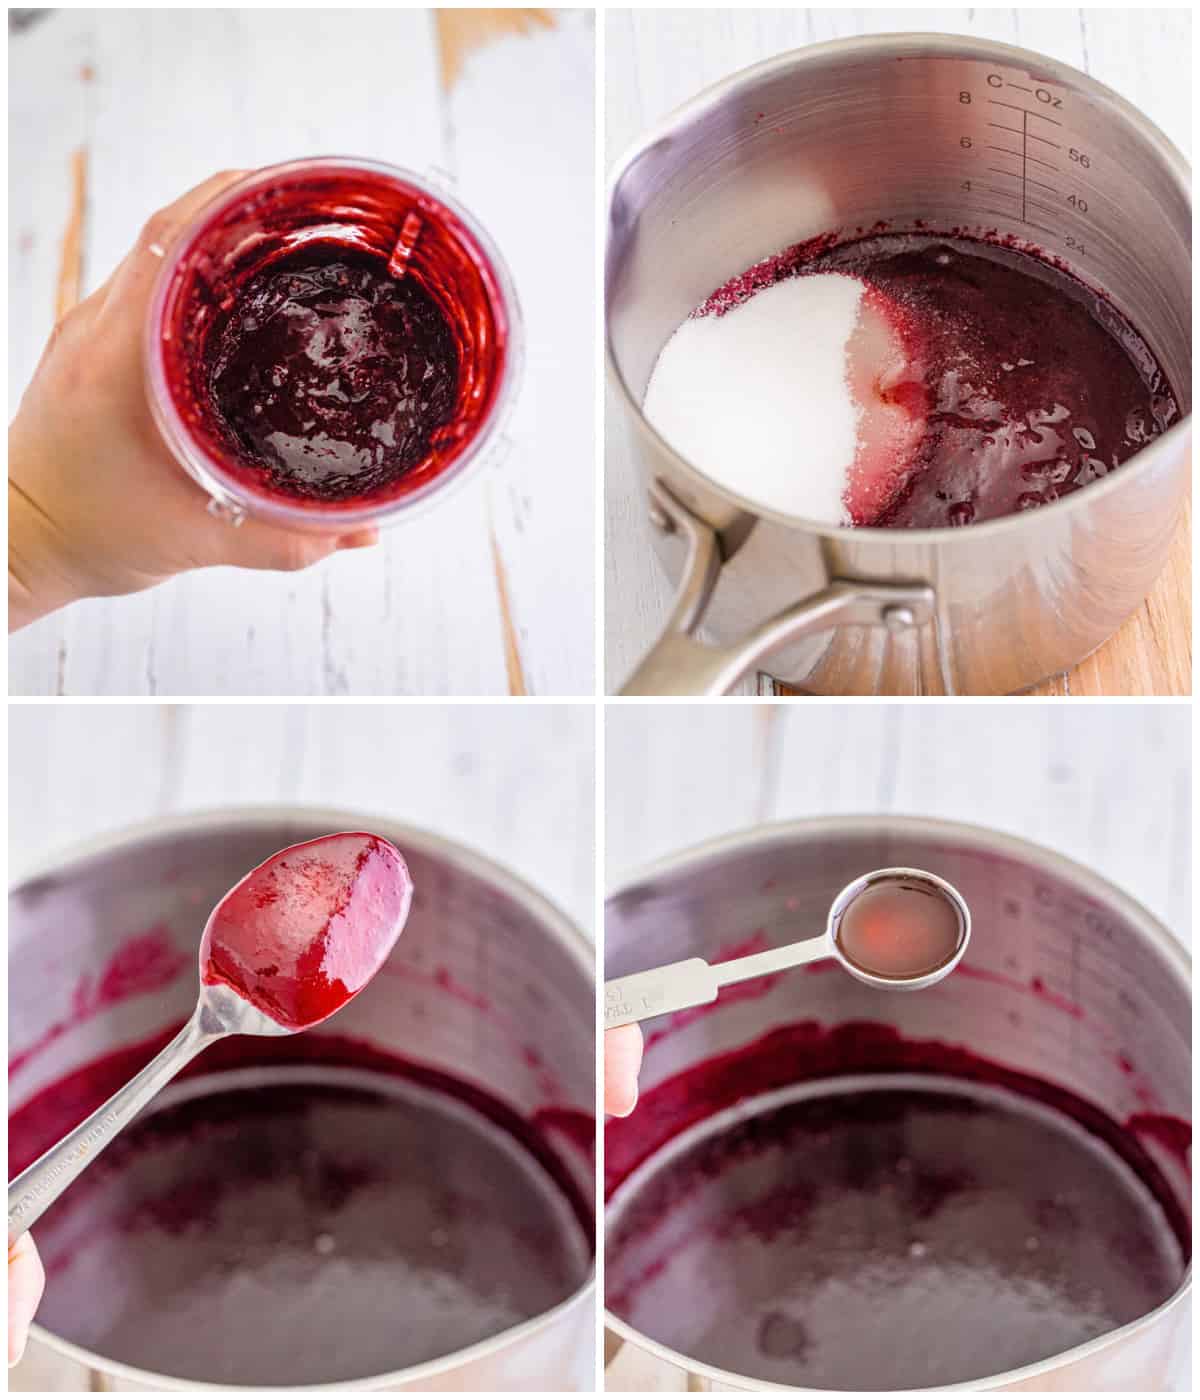 Step by step photos on how to make Blackberry Jam.